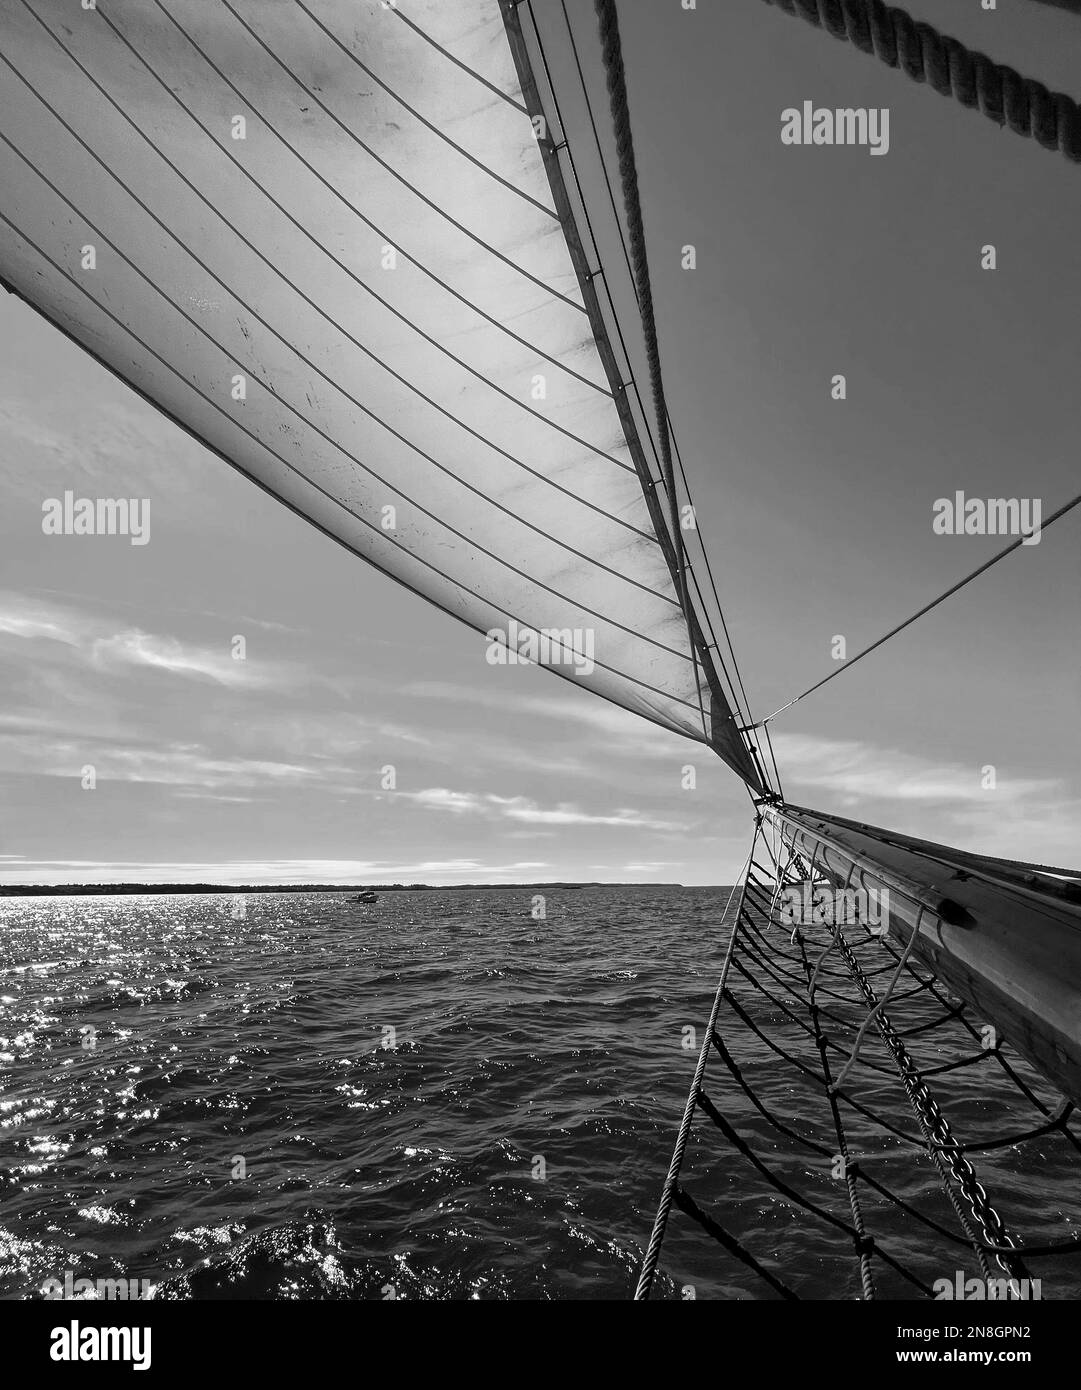 Headsail and bowsprit of an antique tall ship sailing on Maine's Penobscot Bay Stock Photo